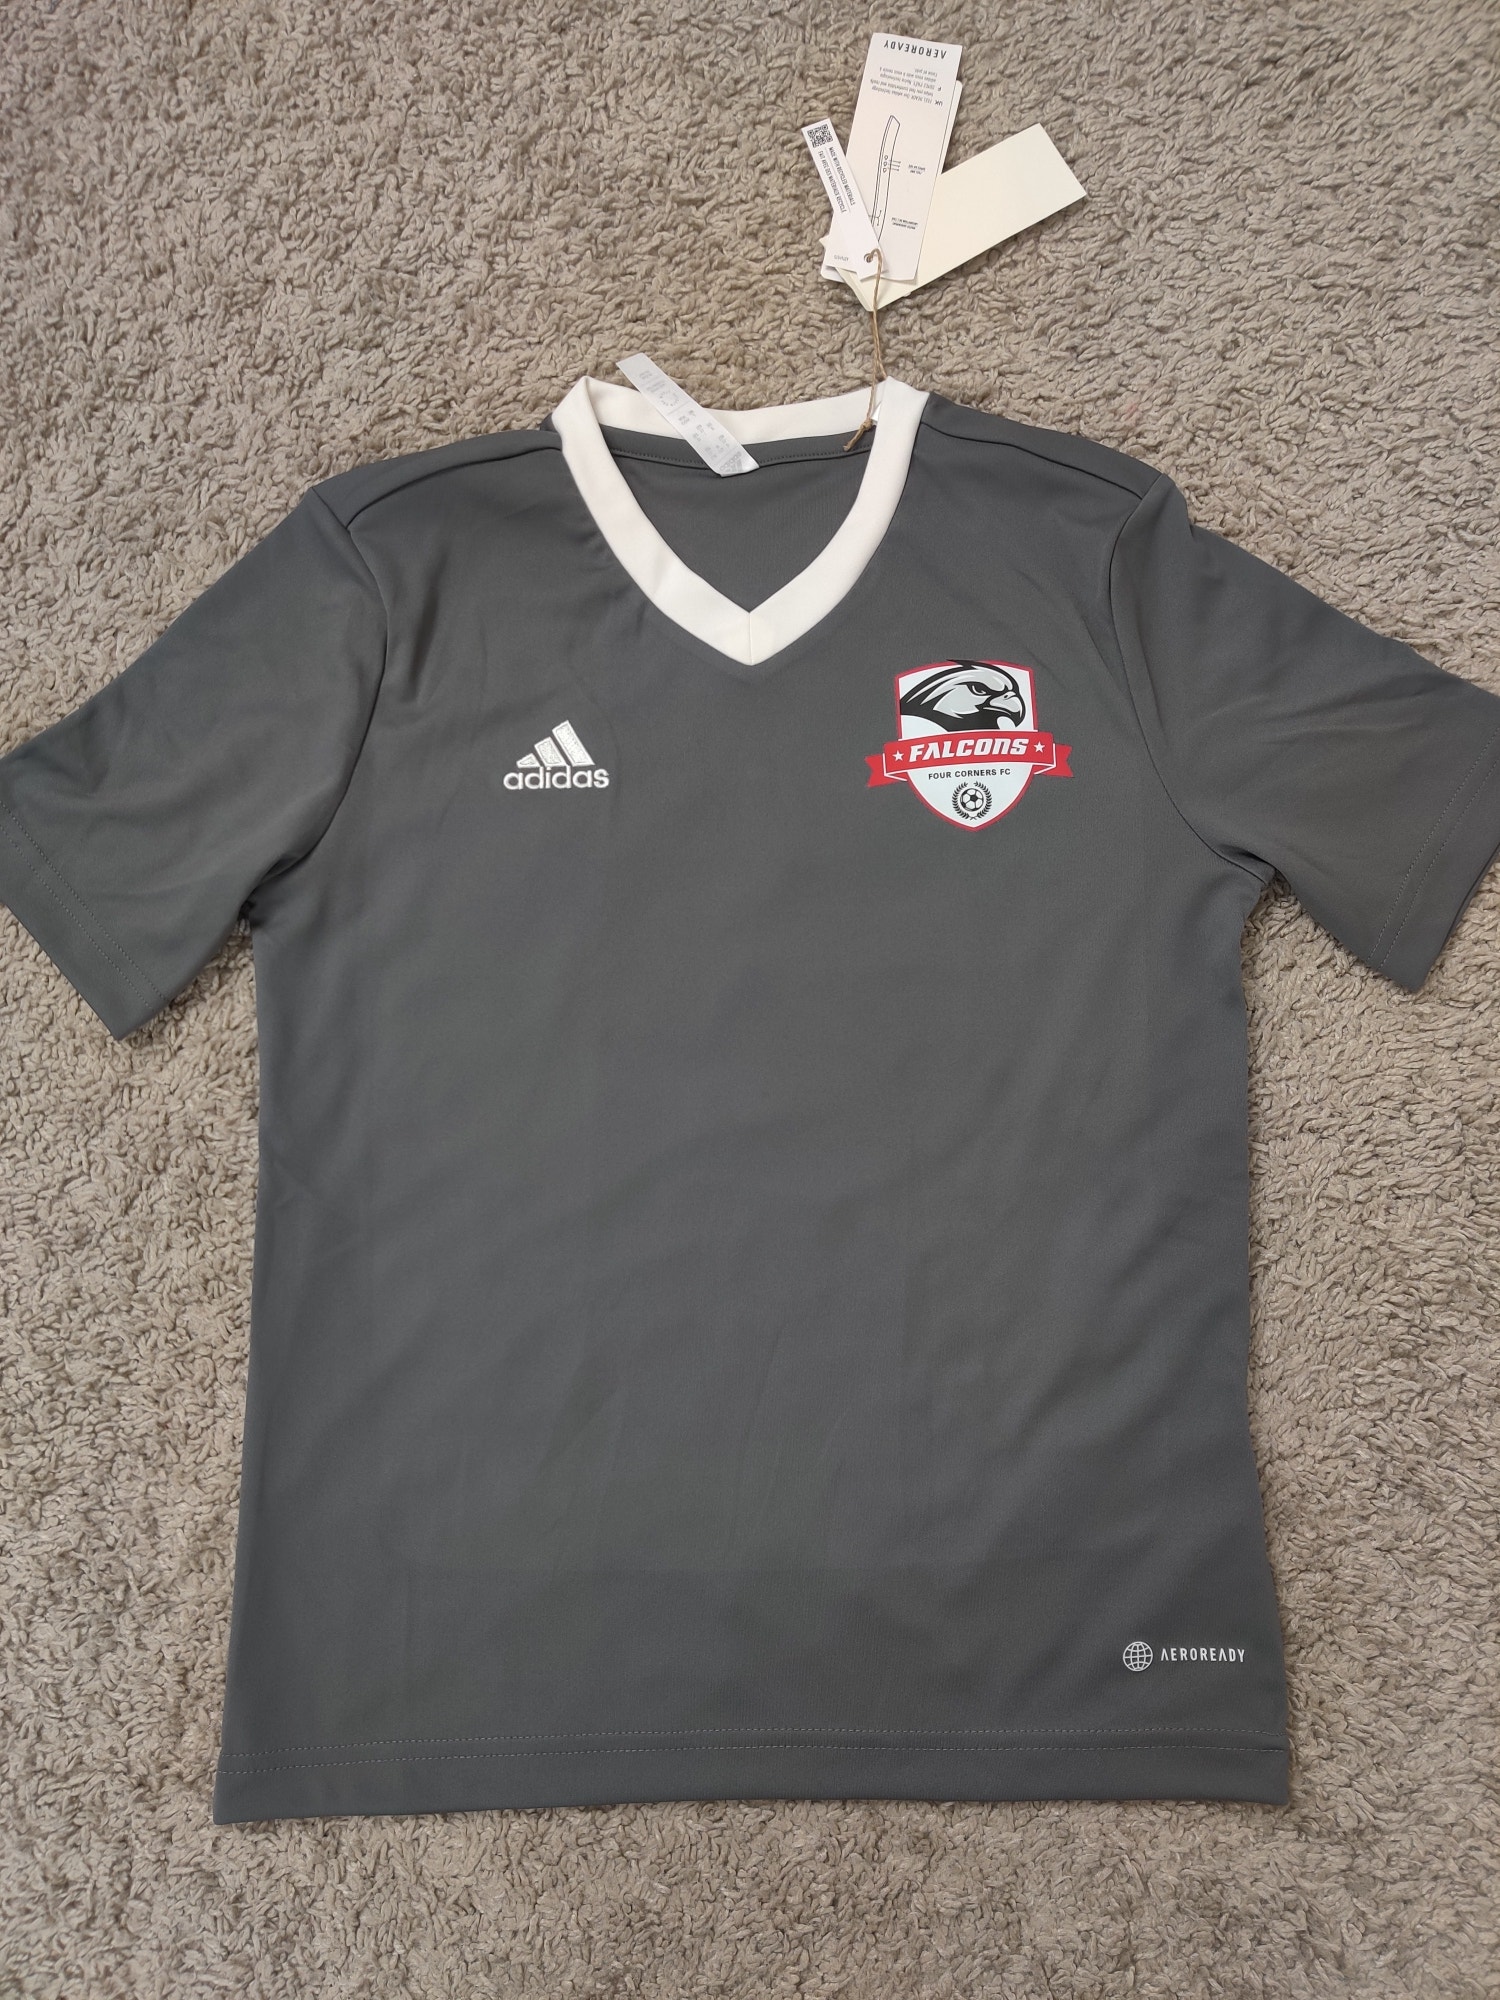 (V) NEW Adidas Youth Falcons Four Cornes FC #40 shirt soccer jersey sz M - Picture 3 of 9